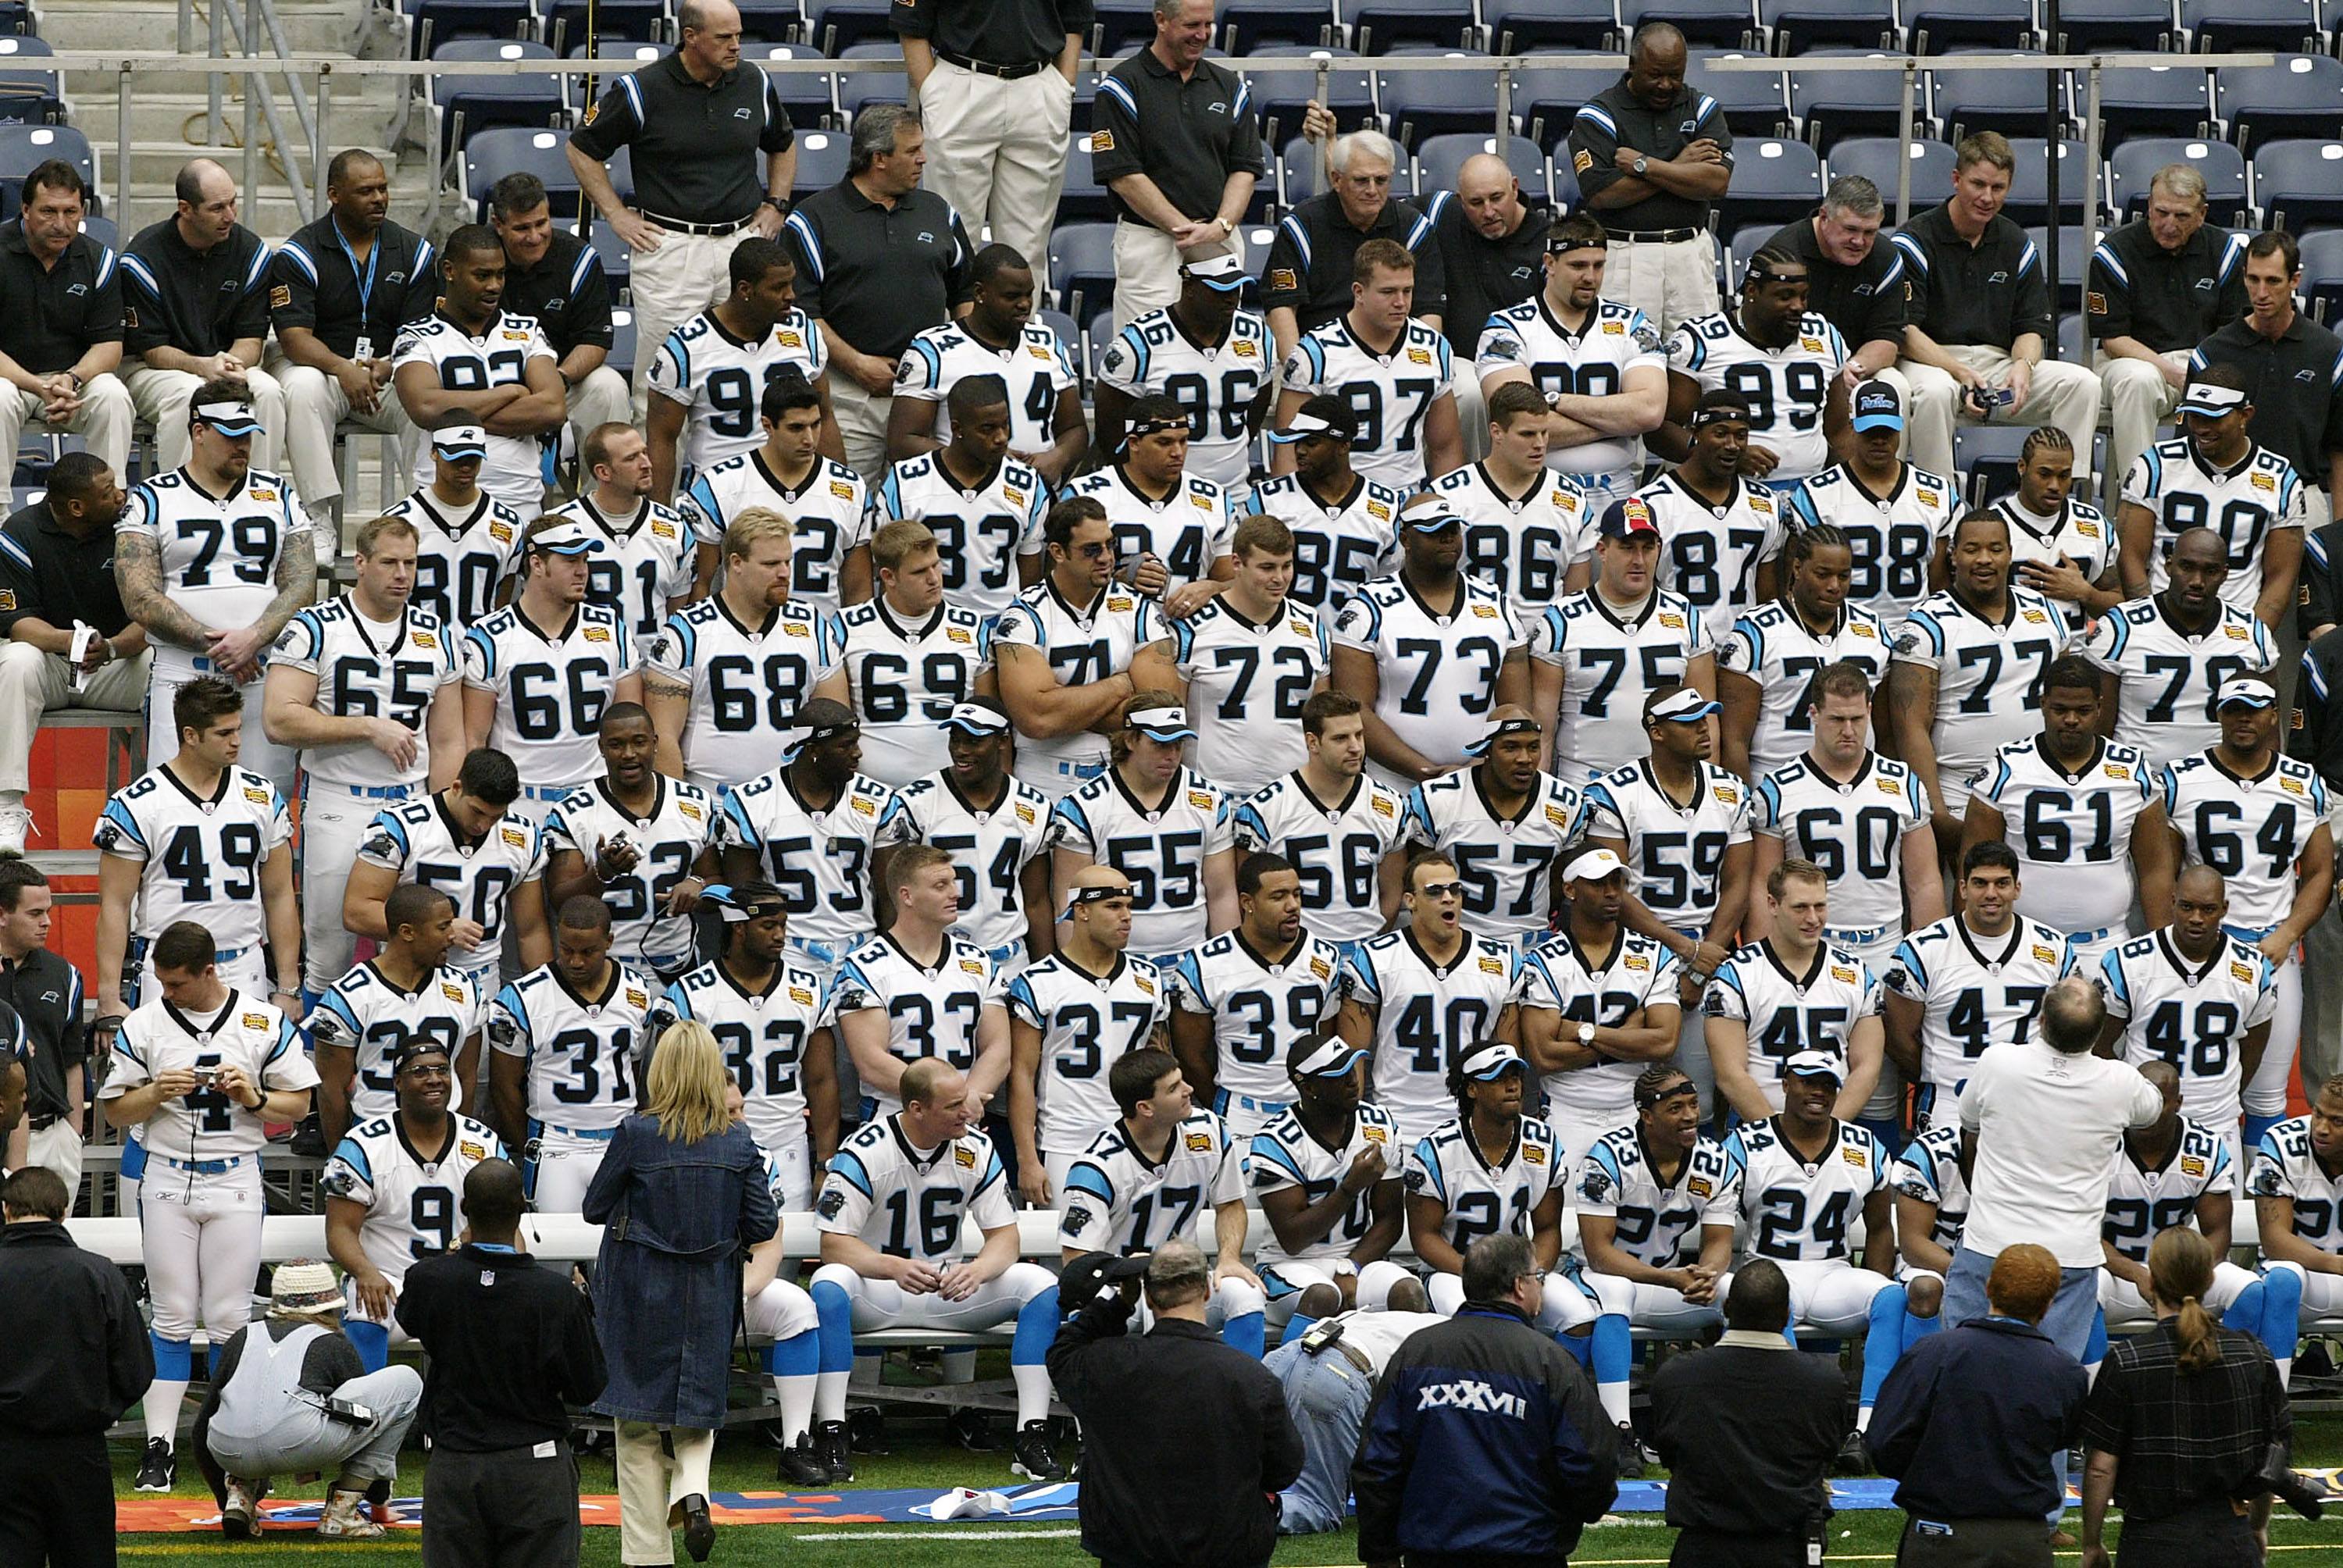 The Carolina Panthers prepare for a team photo on media day